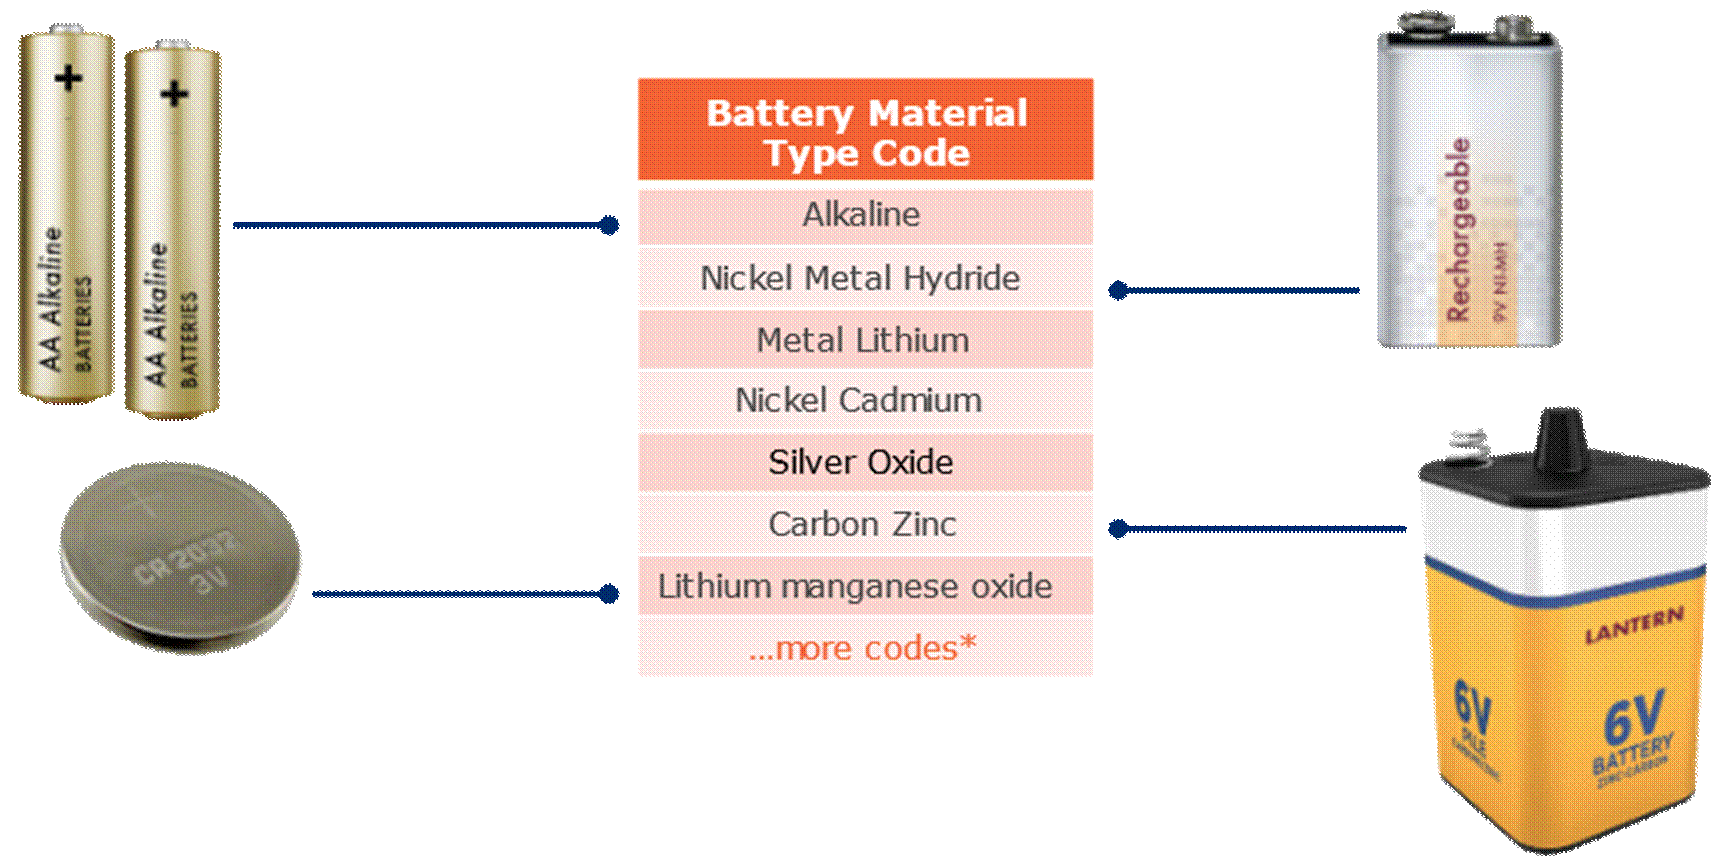 7.2 Battery Material Type Code Examples - Image 0